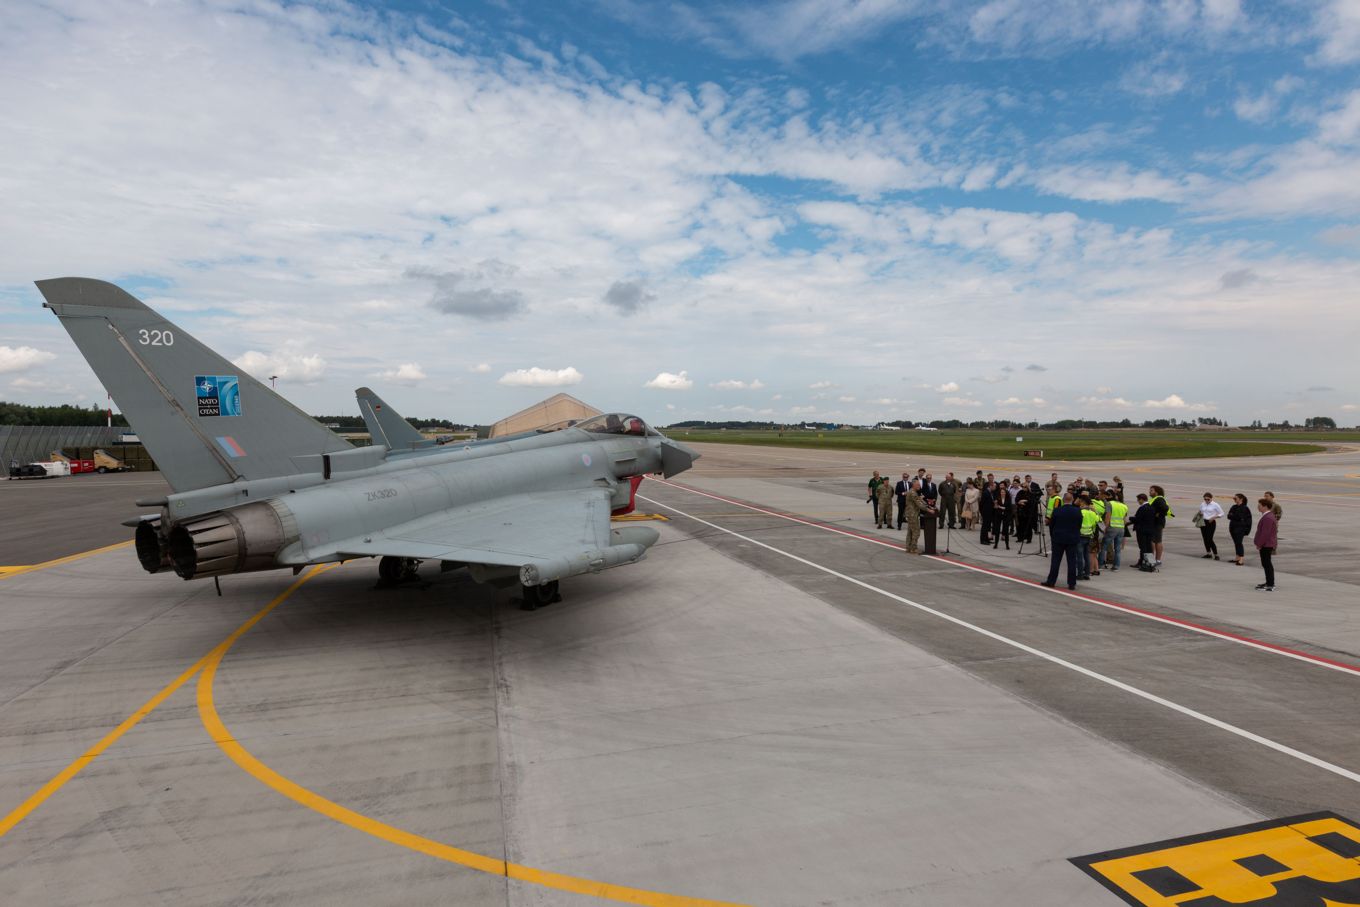 Image shows an RAF Typhoon on the tarmac with people gathered round a person speaking a at a podium.